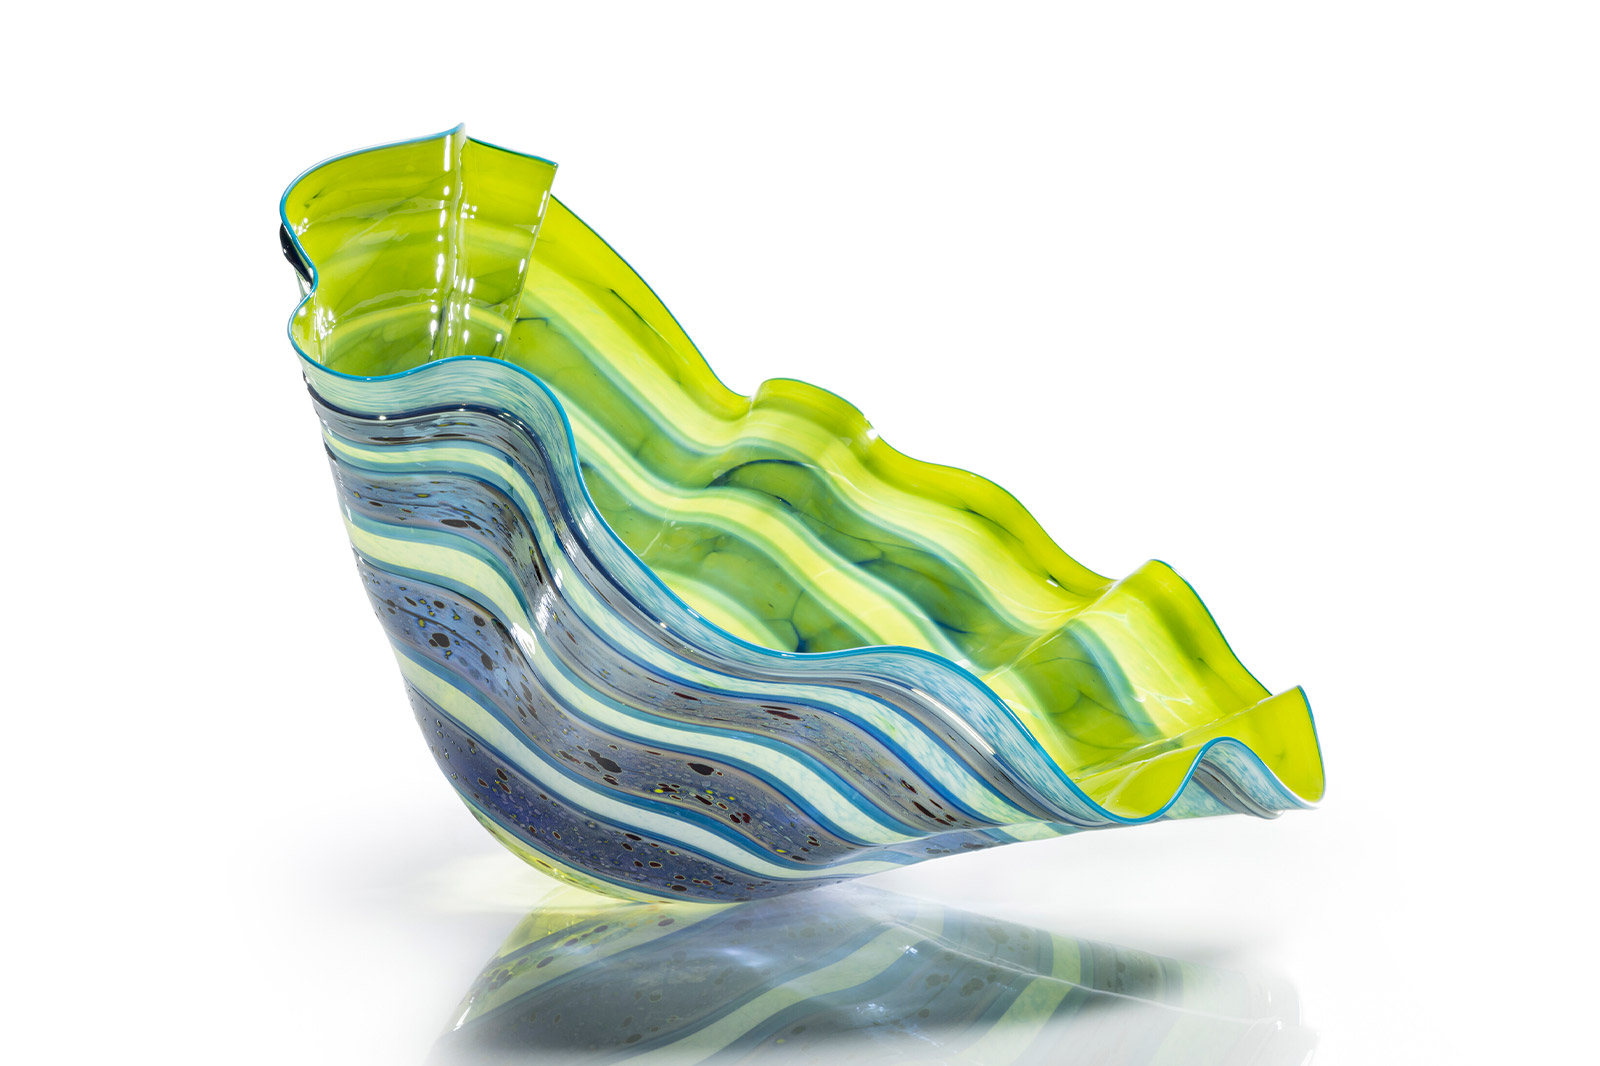 Lime Macchia with Aqua Lip Wrap, 2012 by Dale Chihuly